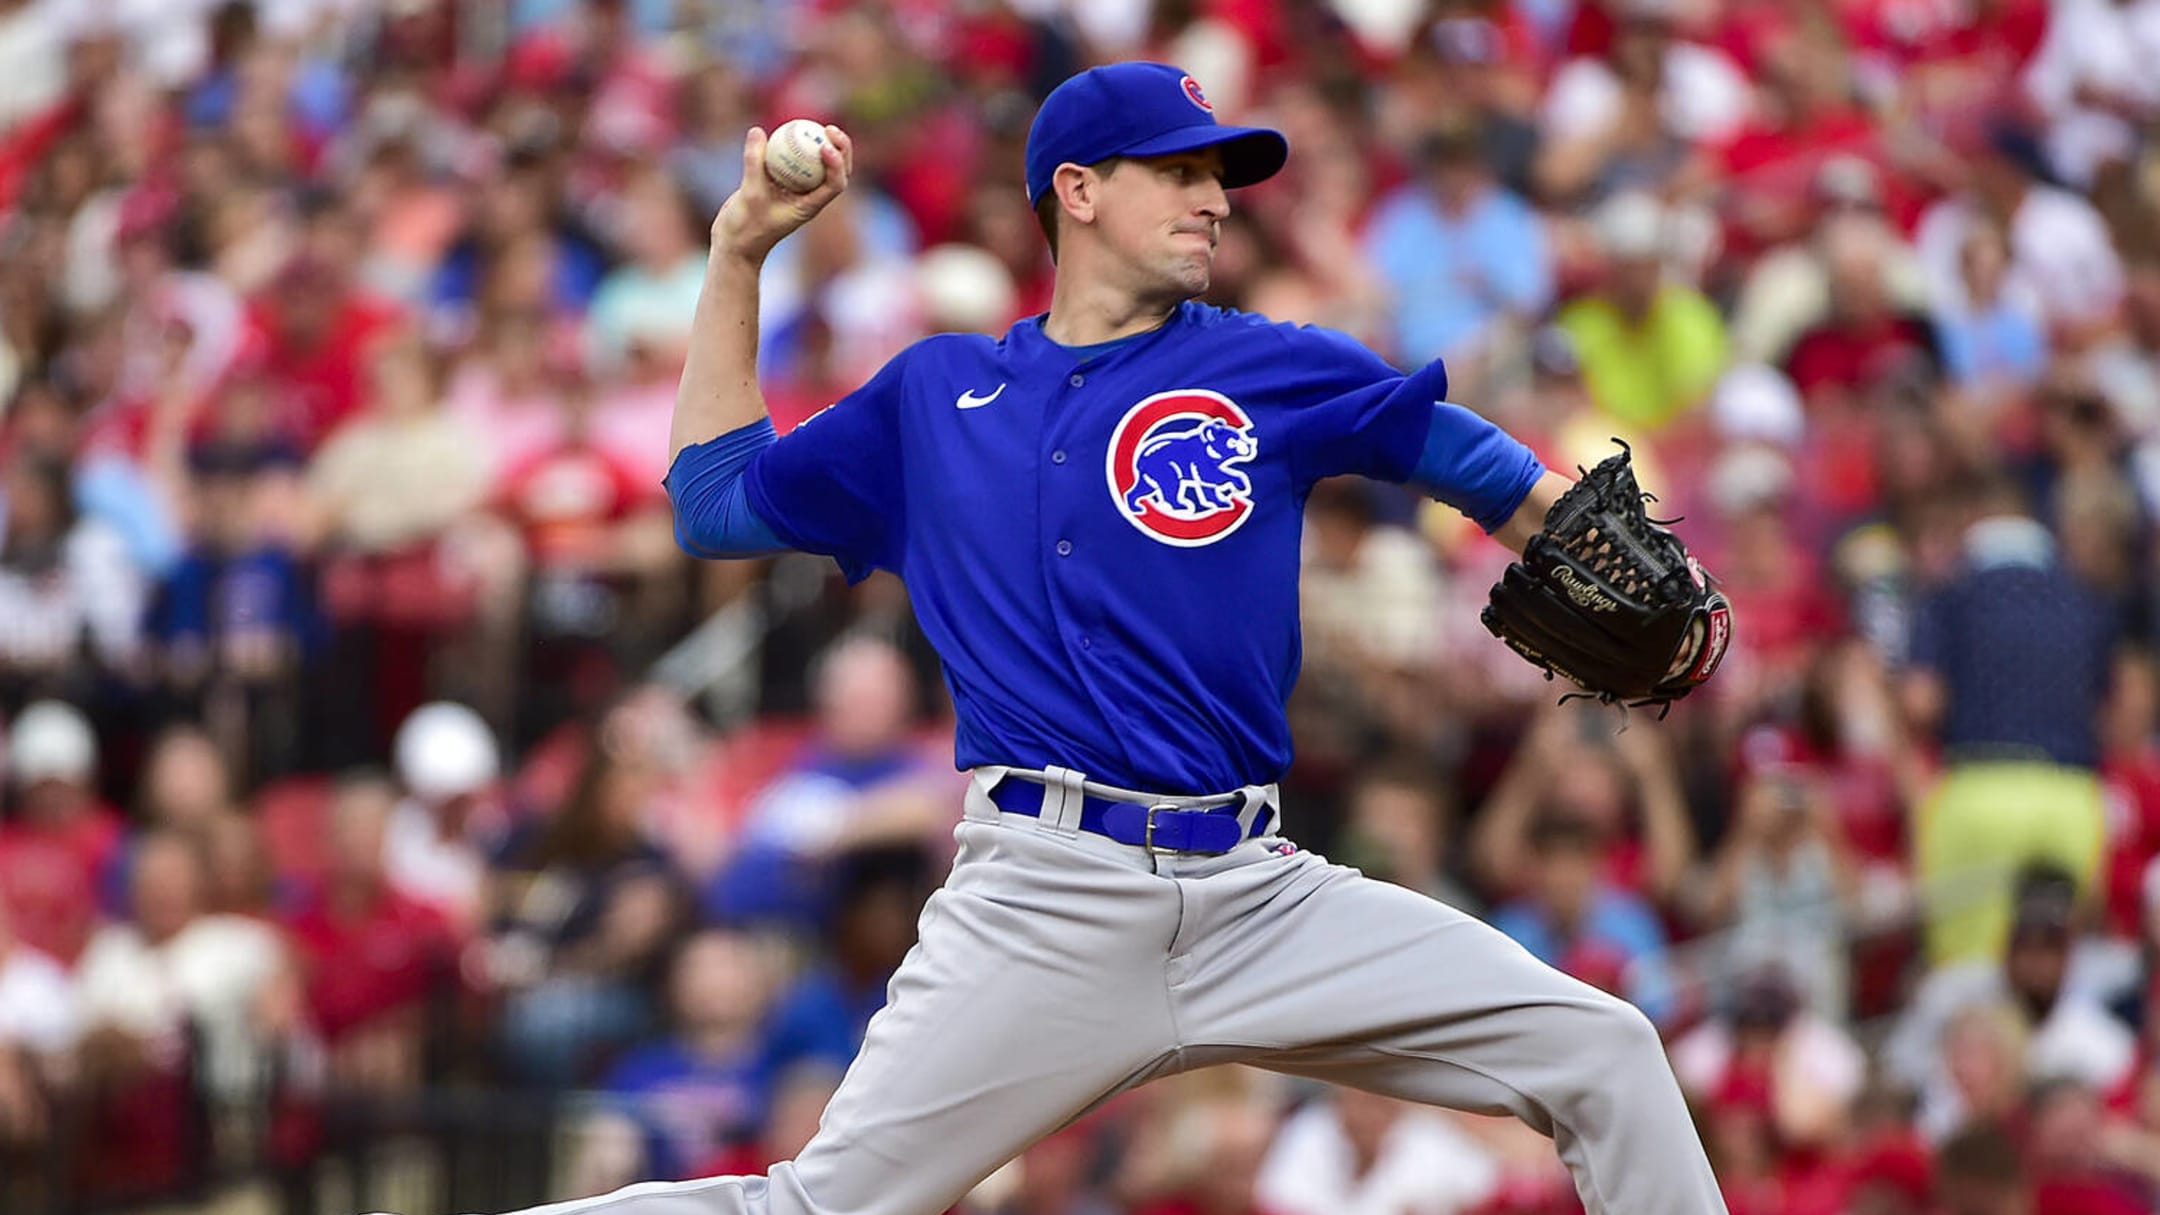 Harden pitches Cubs past Cincinnati, back into first place